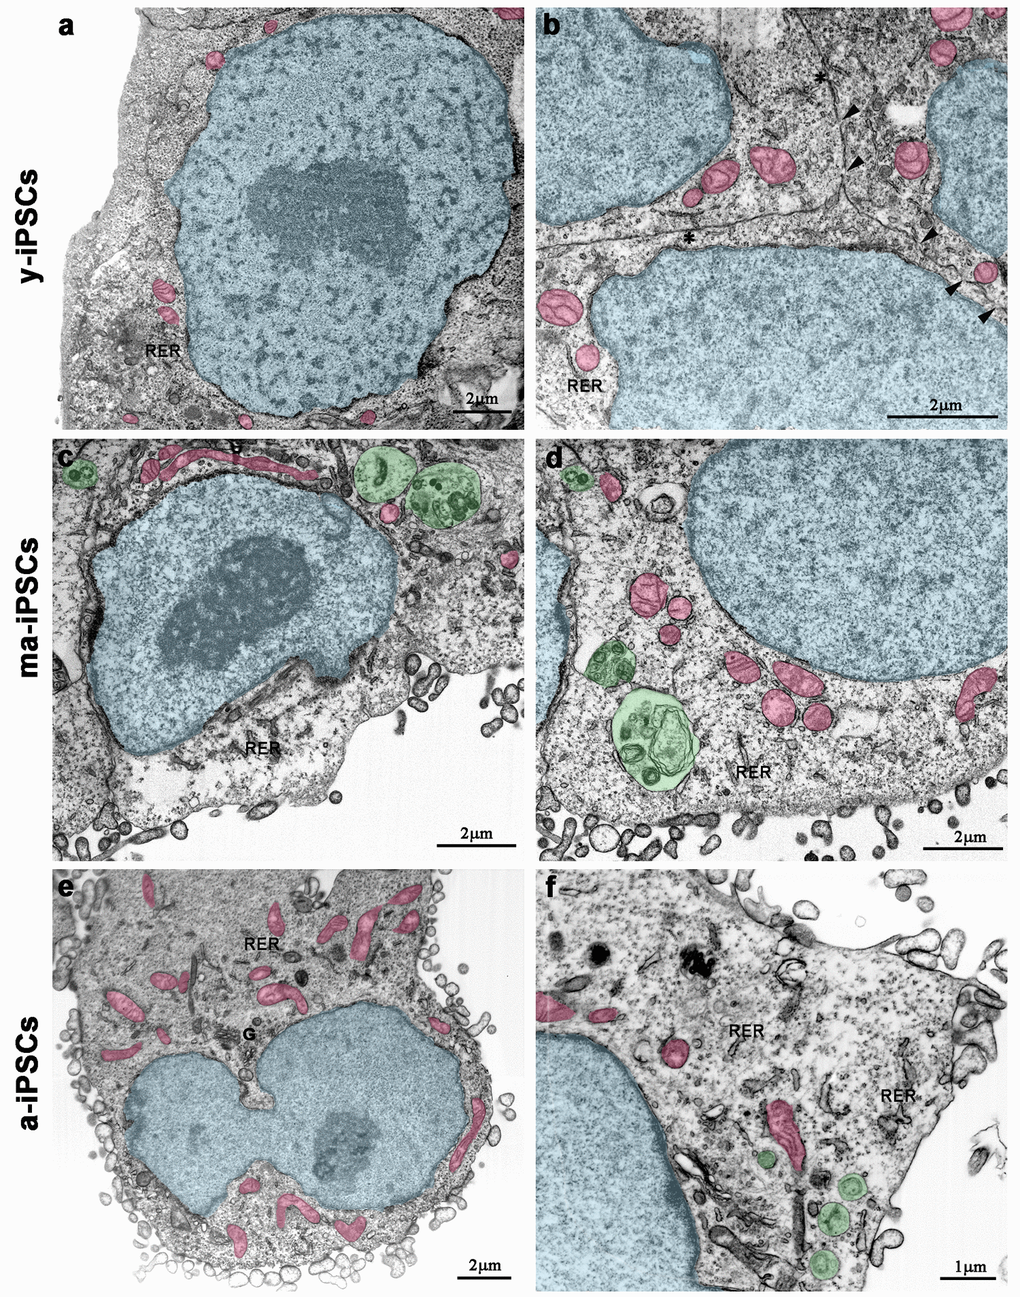 FIB/SEM micrographs of y-iPSCs (a,b), ma-iPSCs (c,d) and a-iPSCs (e,f). Images have been electronically colored to highlight nuclei (in blue), mitochondria (in pink), and autophagosomes (in green). Arrowheads, gap junctions; asterisks, tight junctions; G, Golgi apparatus; RER, rough endoplasmic reticulum.